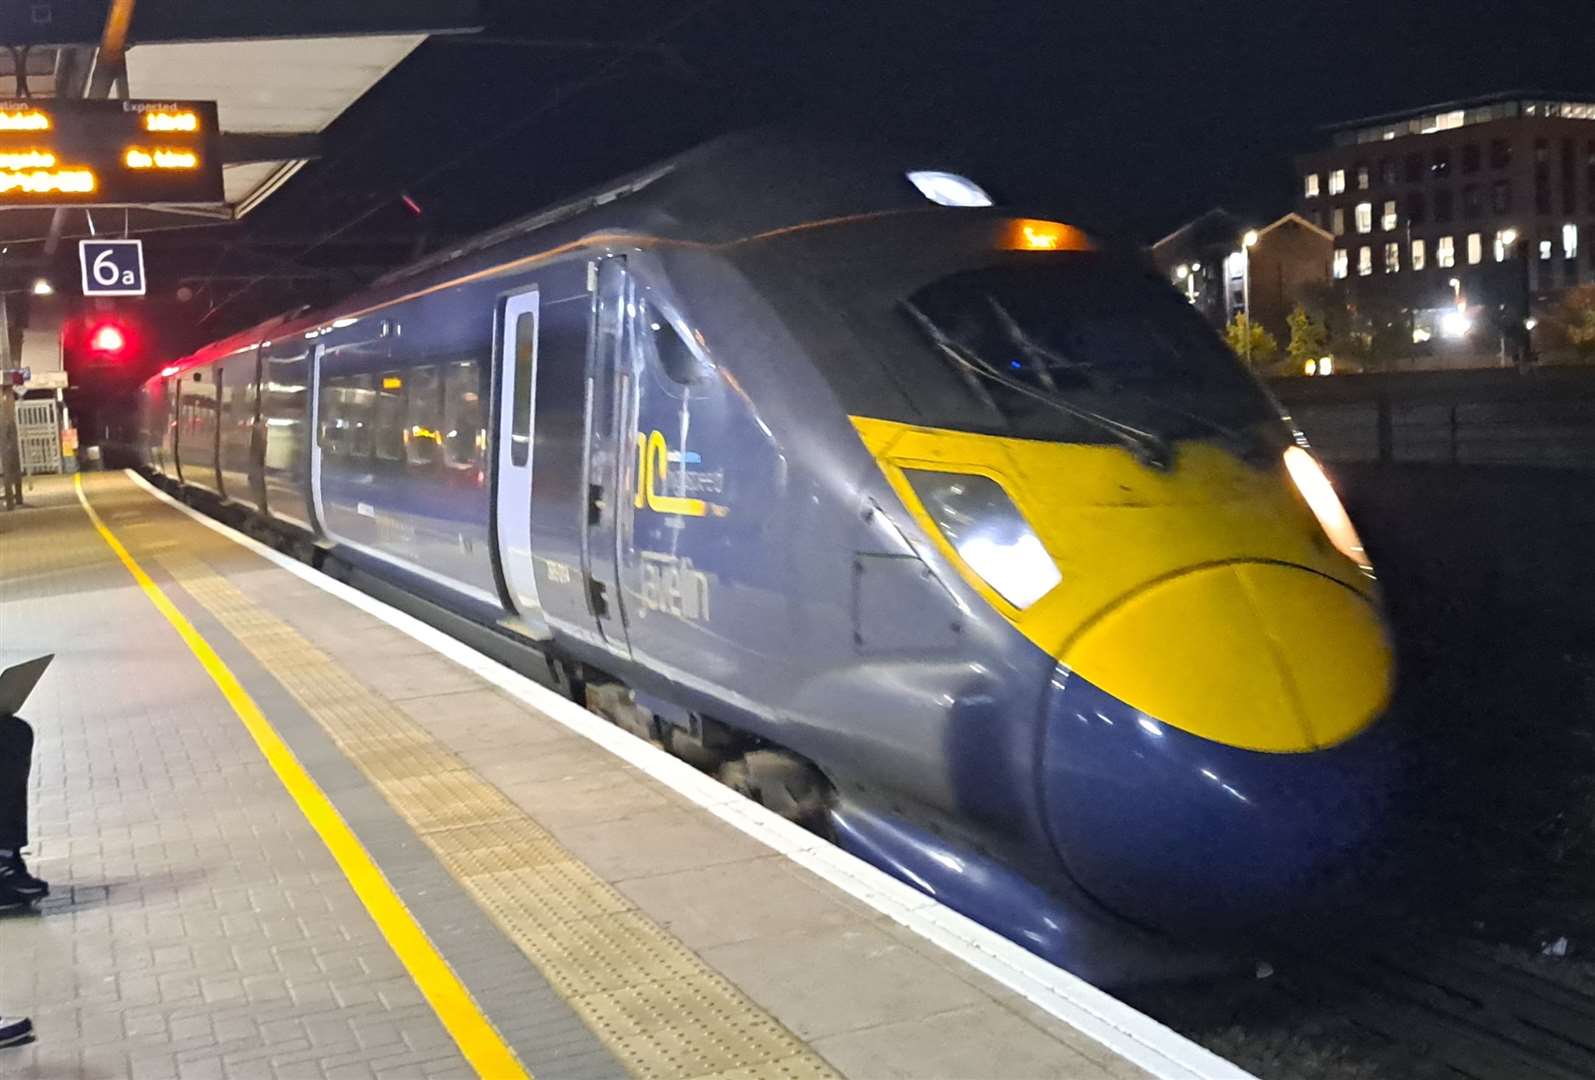 High speed services from Ashford will end earlier on the strike days